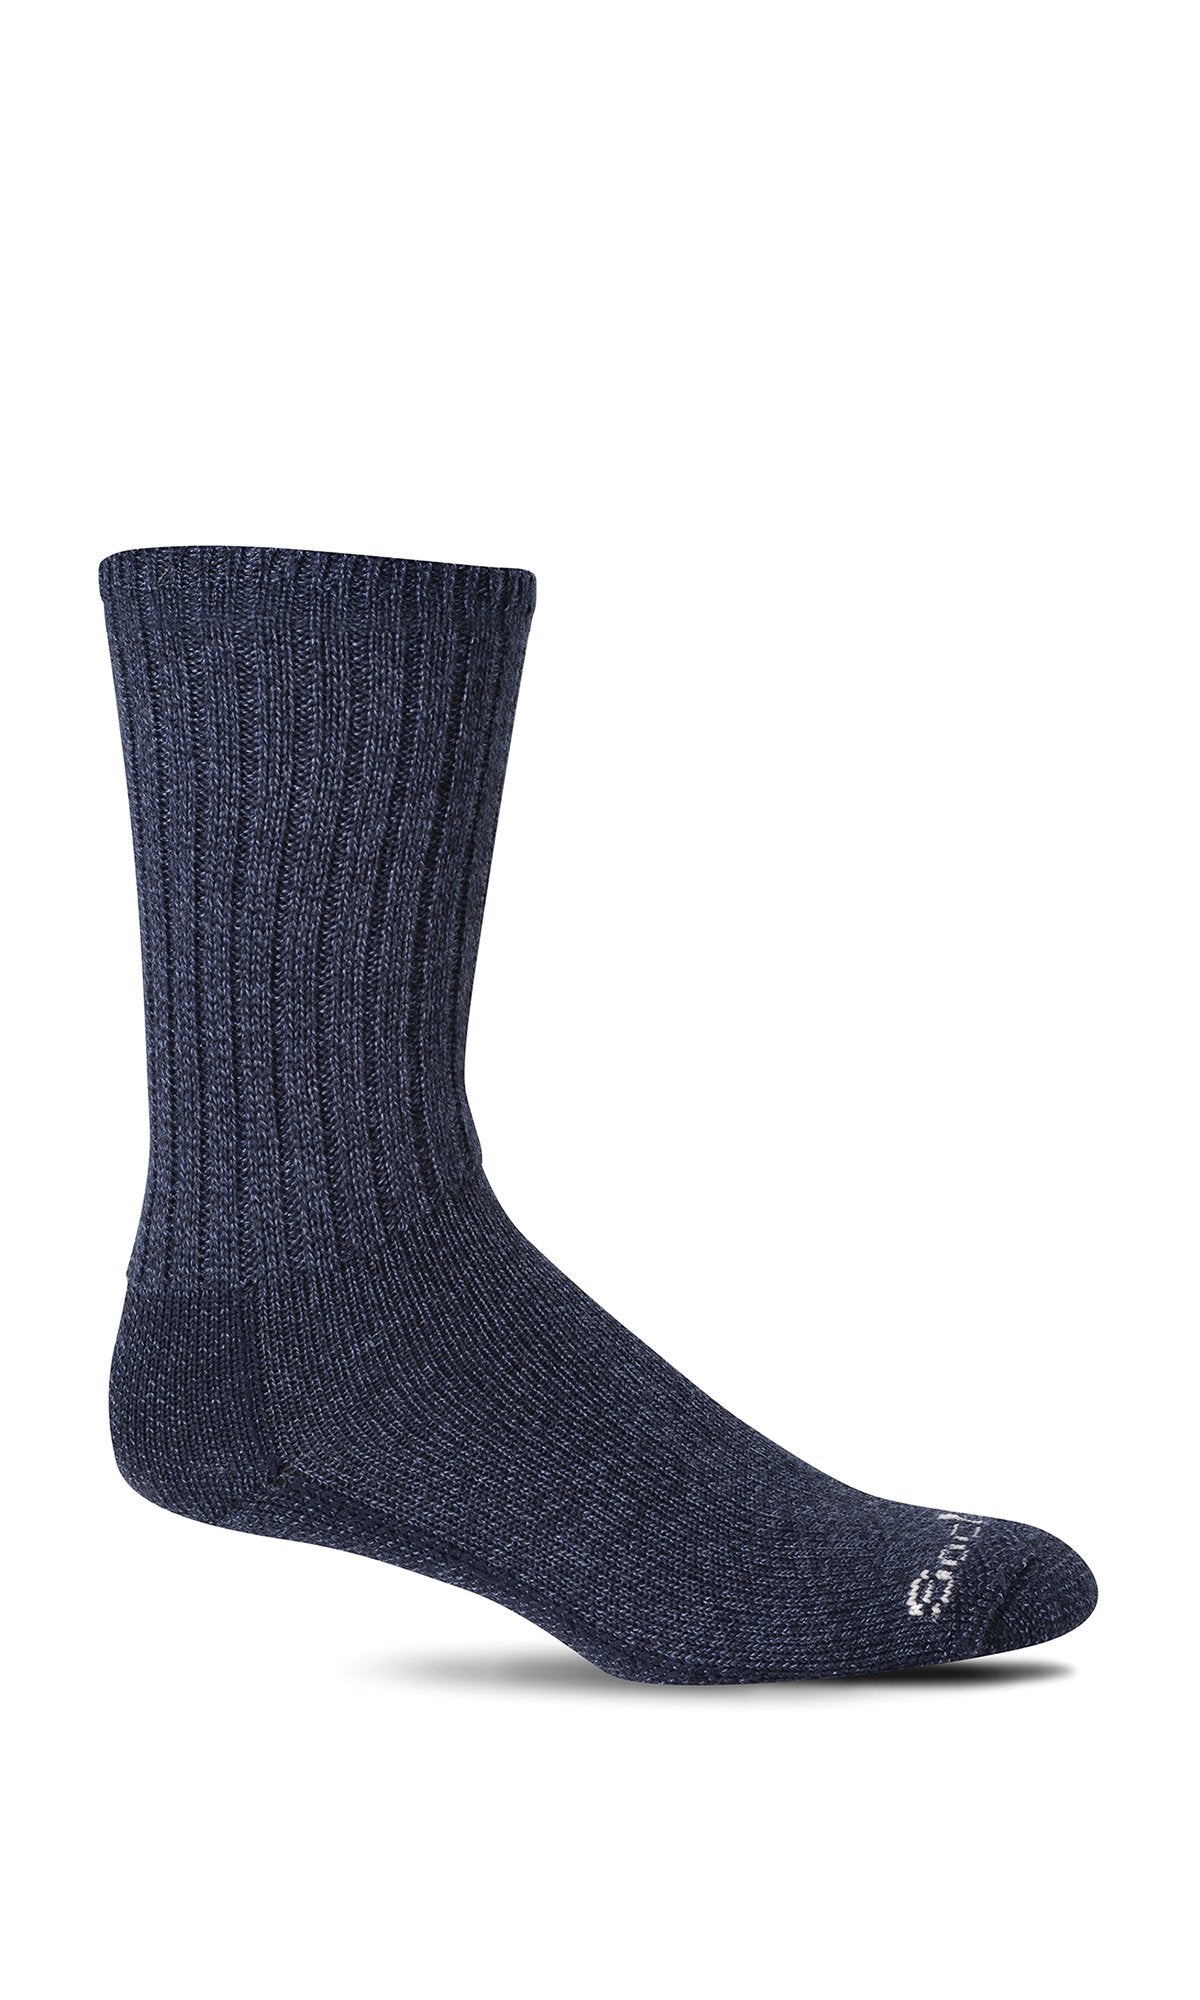 Pamper and protect your feet in Sockwell's Big Easy relaxed fit non-binding diabetic-friendly merino wool socks in vibrant teal